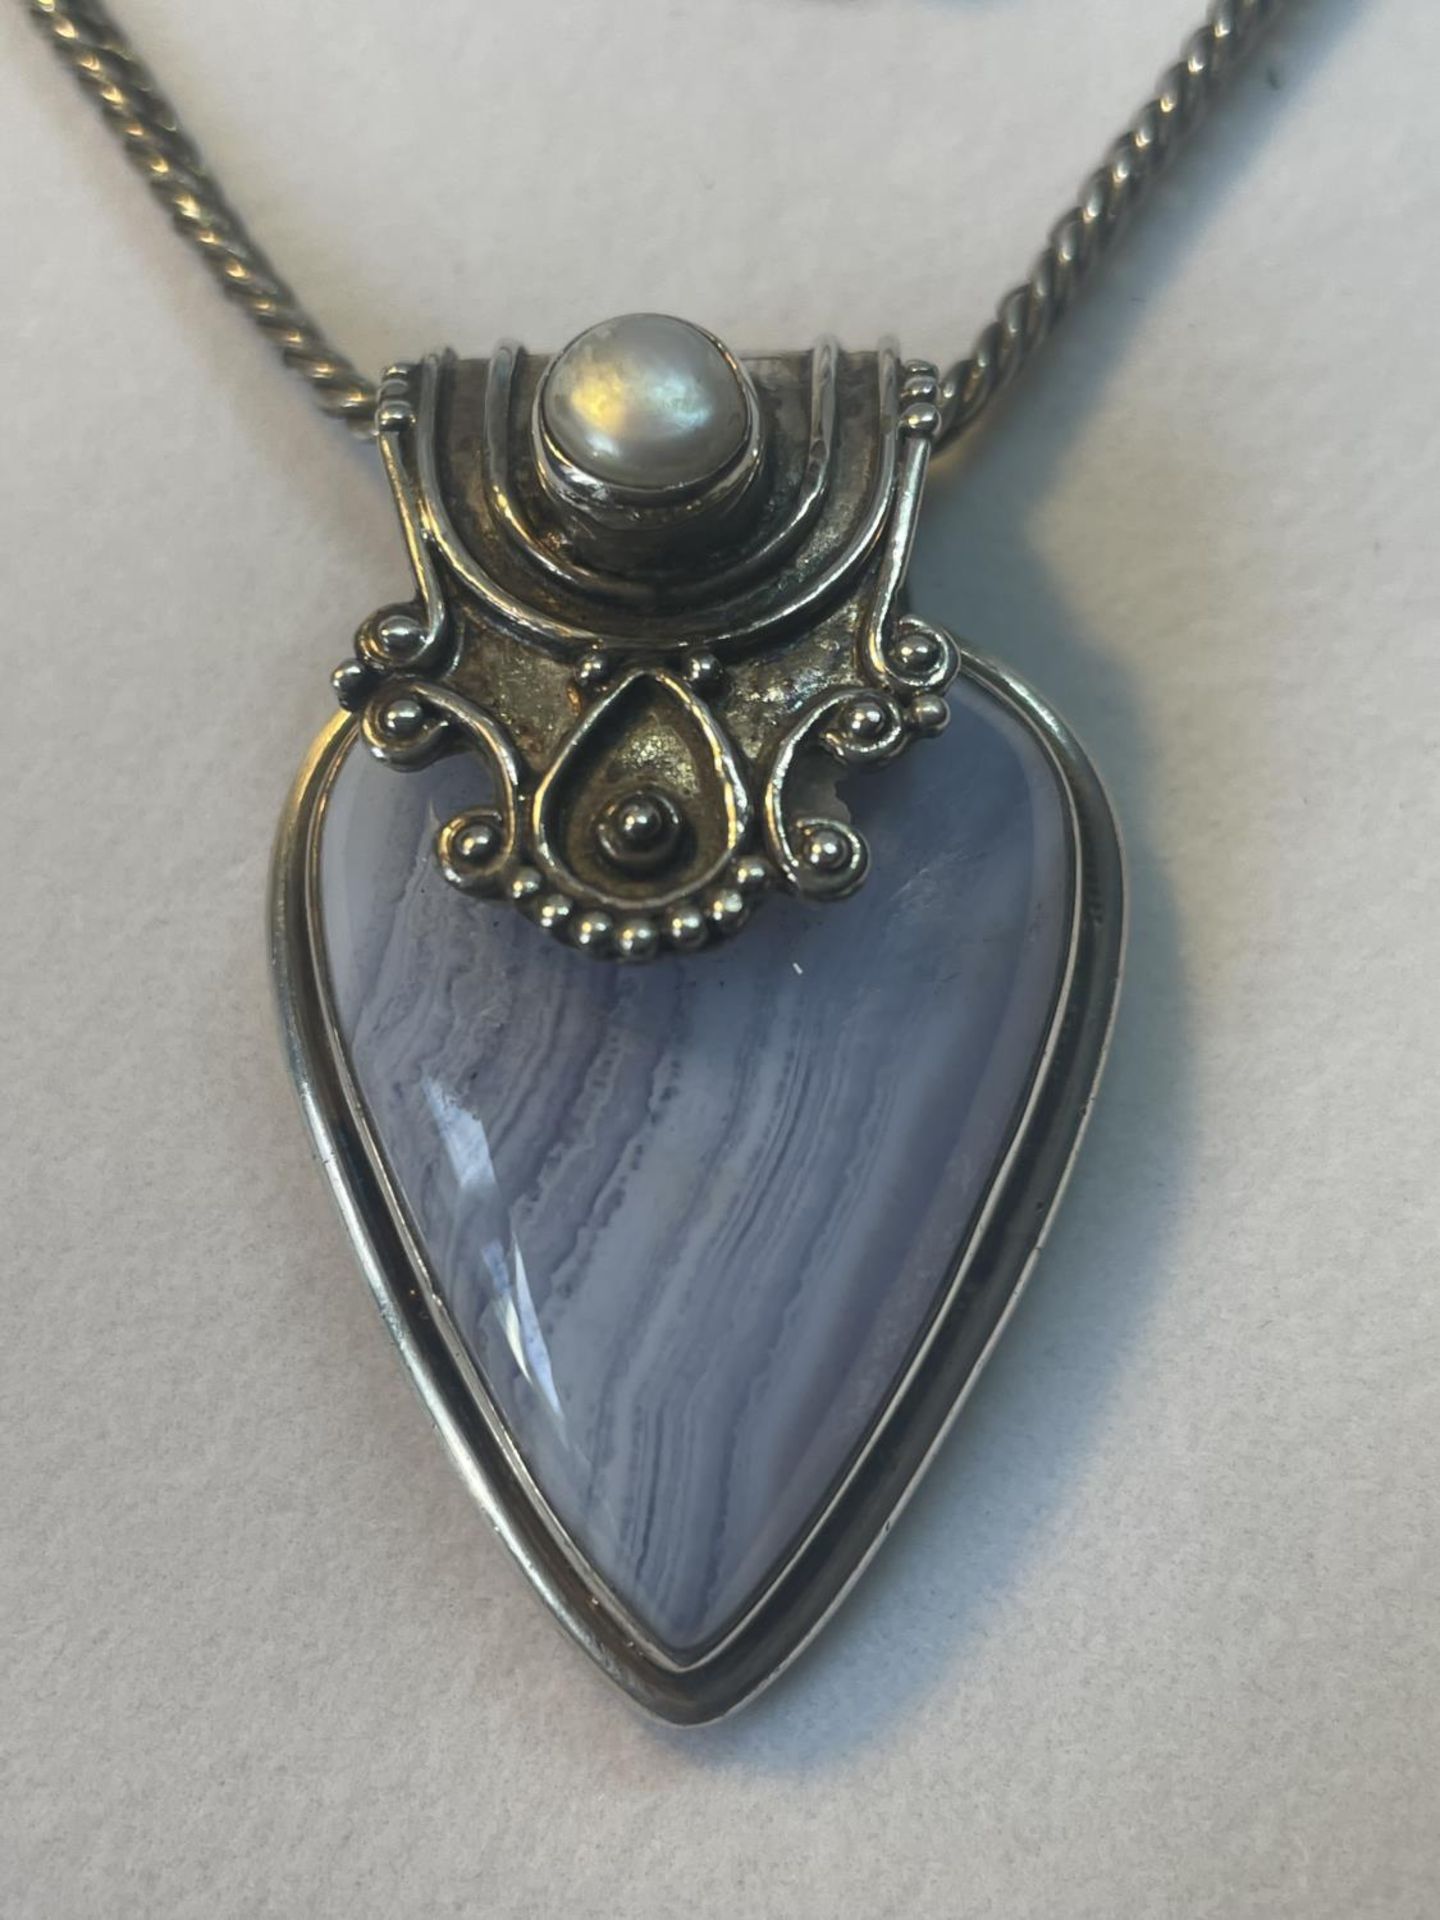 A MARKED SILVER NECKLACE WITH AN ORNATE FRAMED BLUE STONE PENDANT - Image 2 of 4